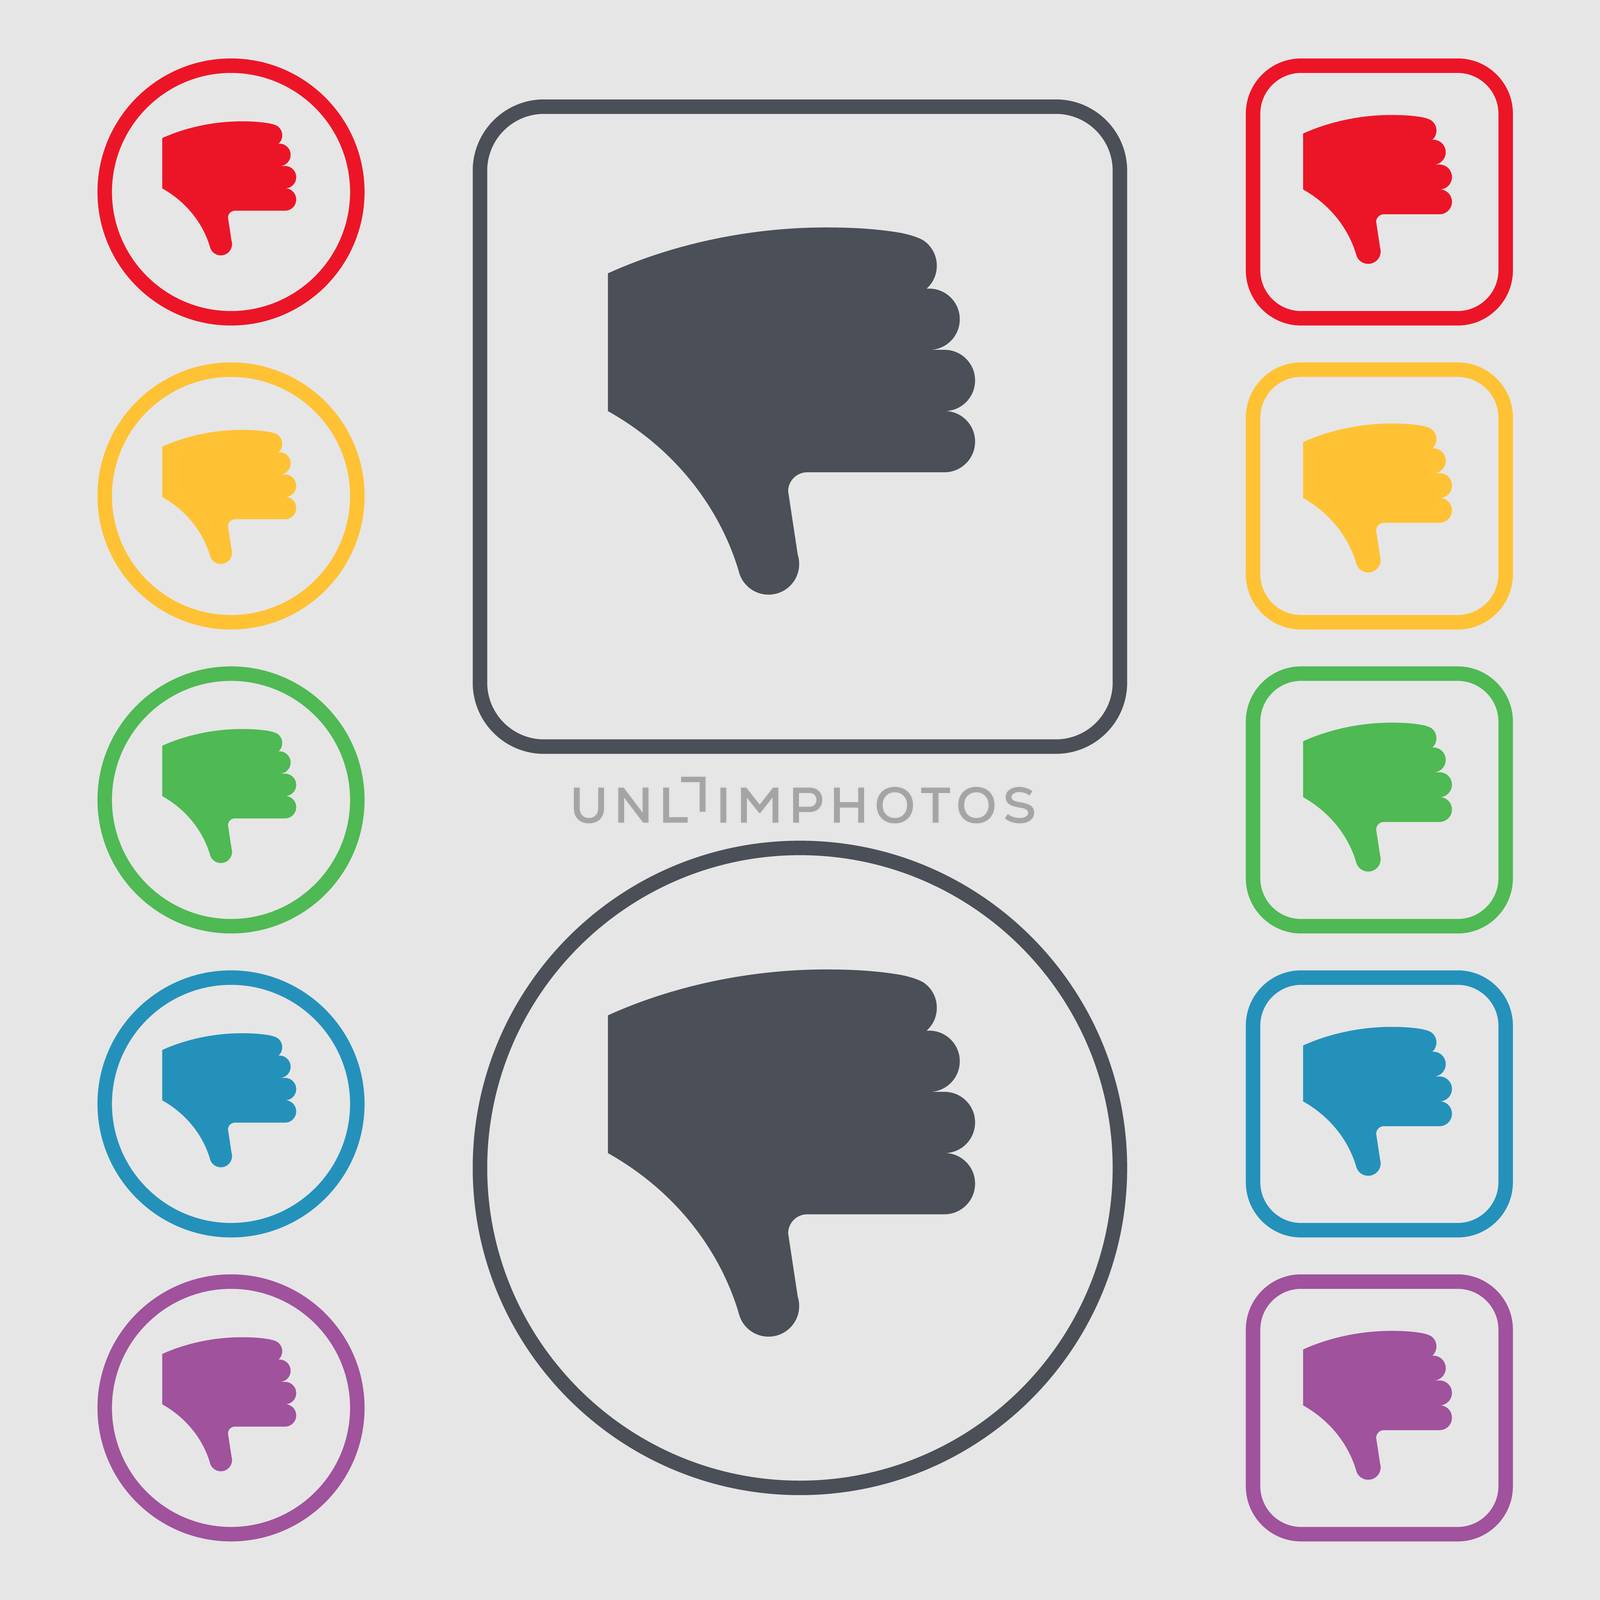 Dislike, Thumb down, Hand finger down icon sign. symbol on the Round and square buttons with frame. illustration